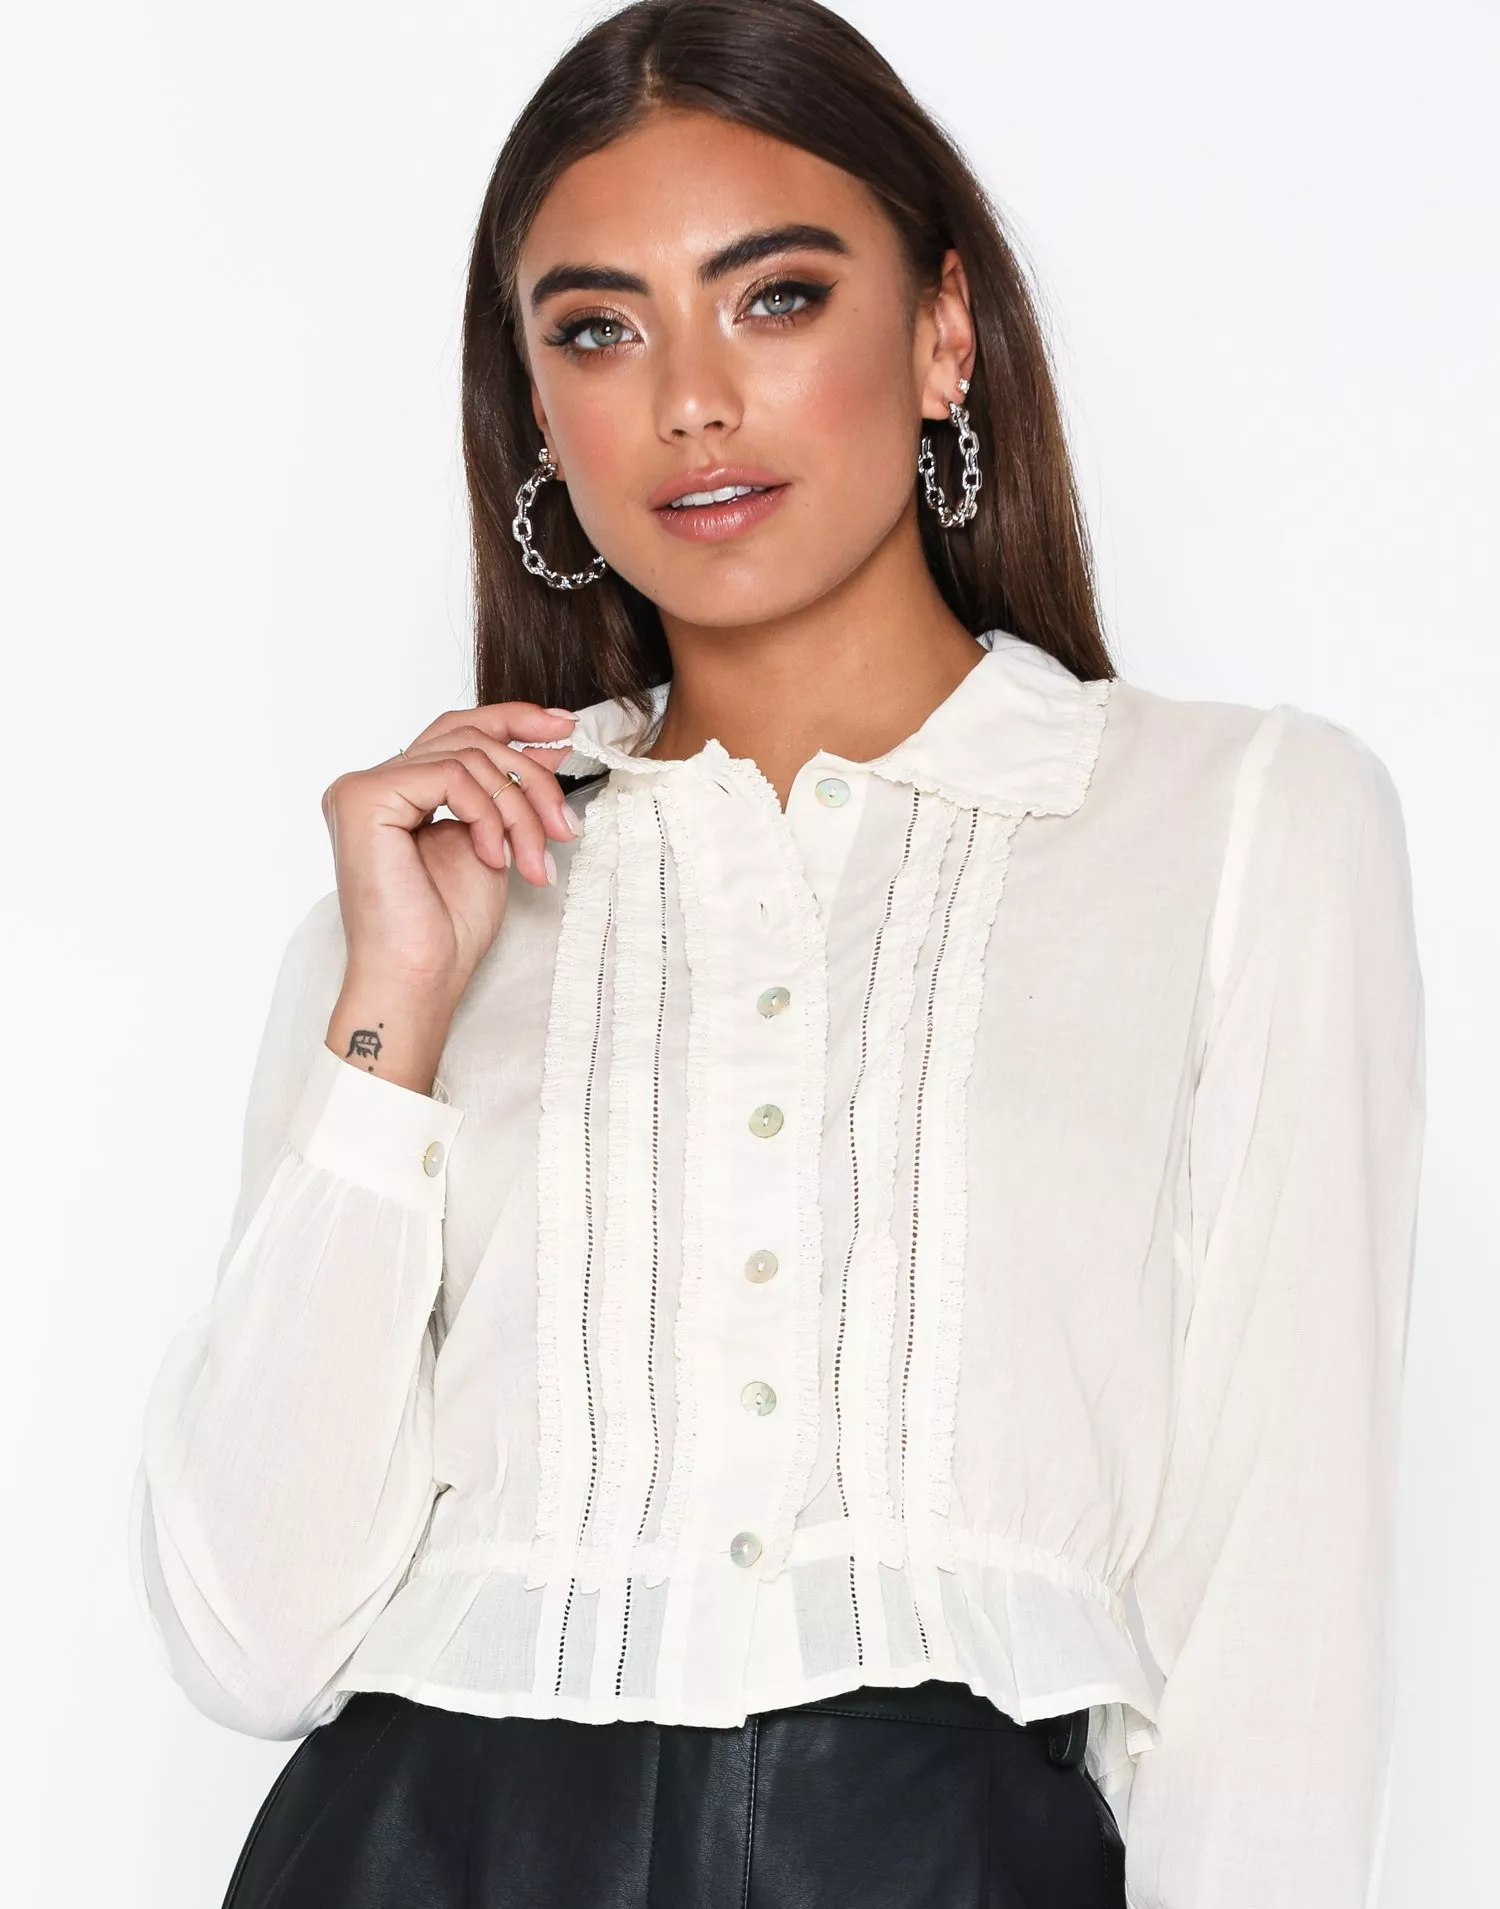 Buy Nelly Delightful Blouse - White | Nelly.com